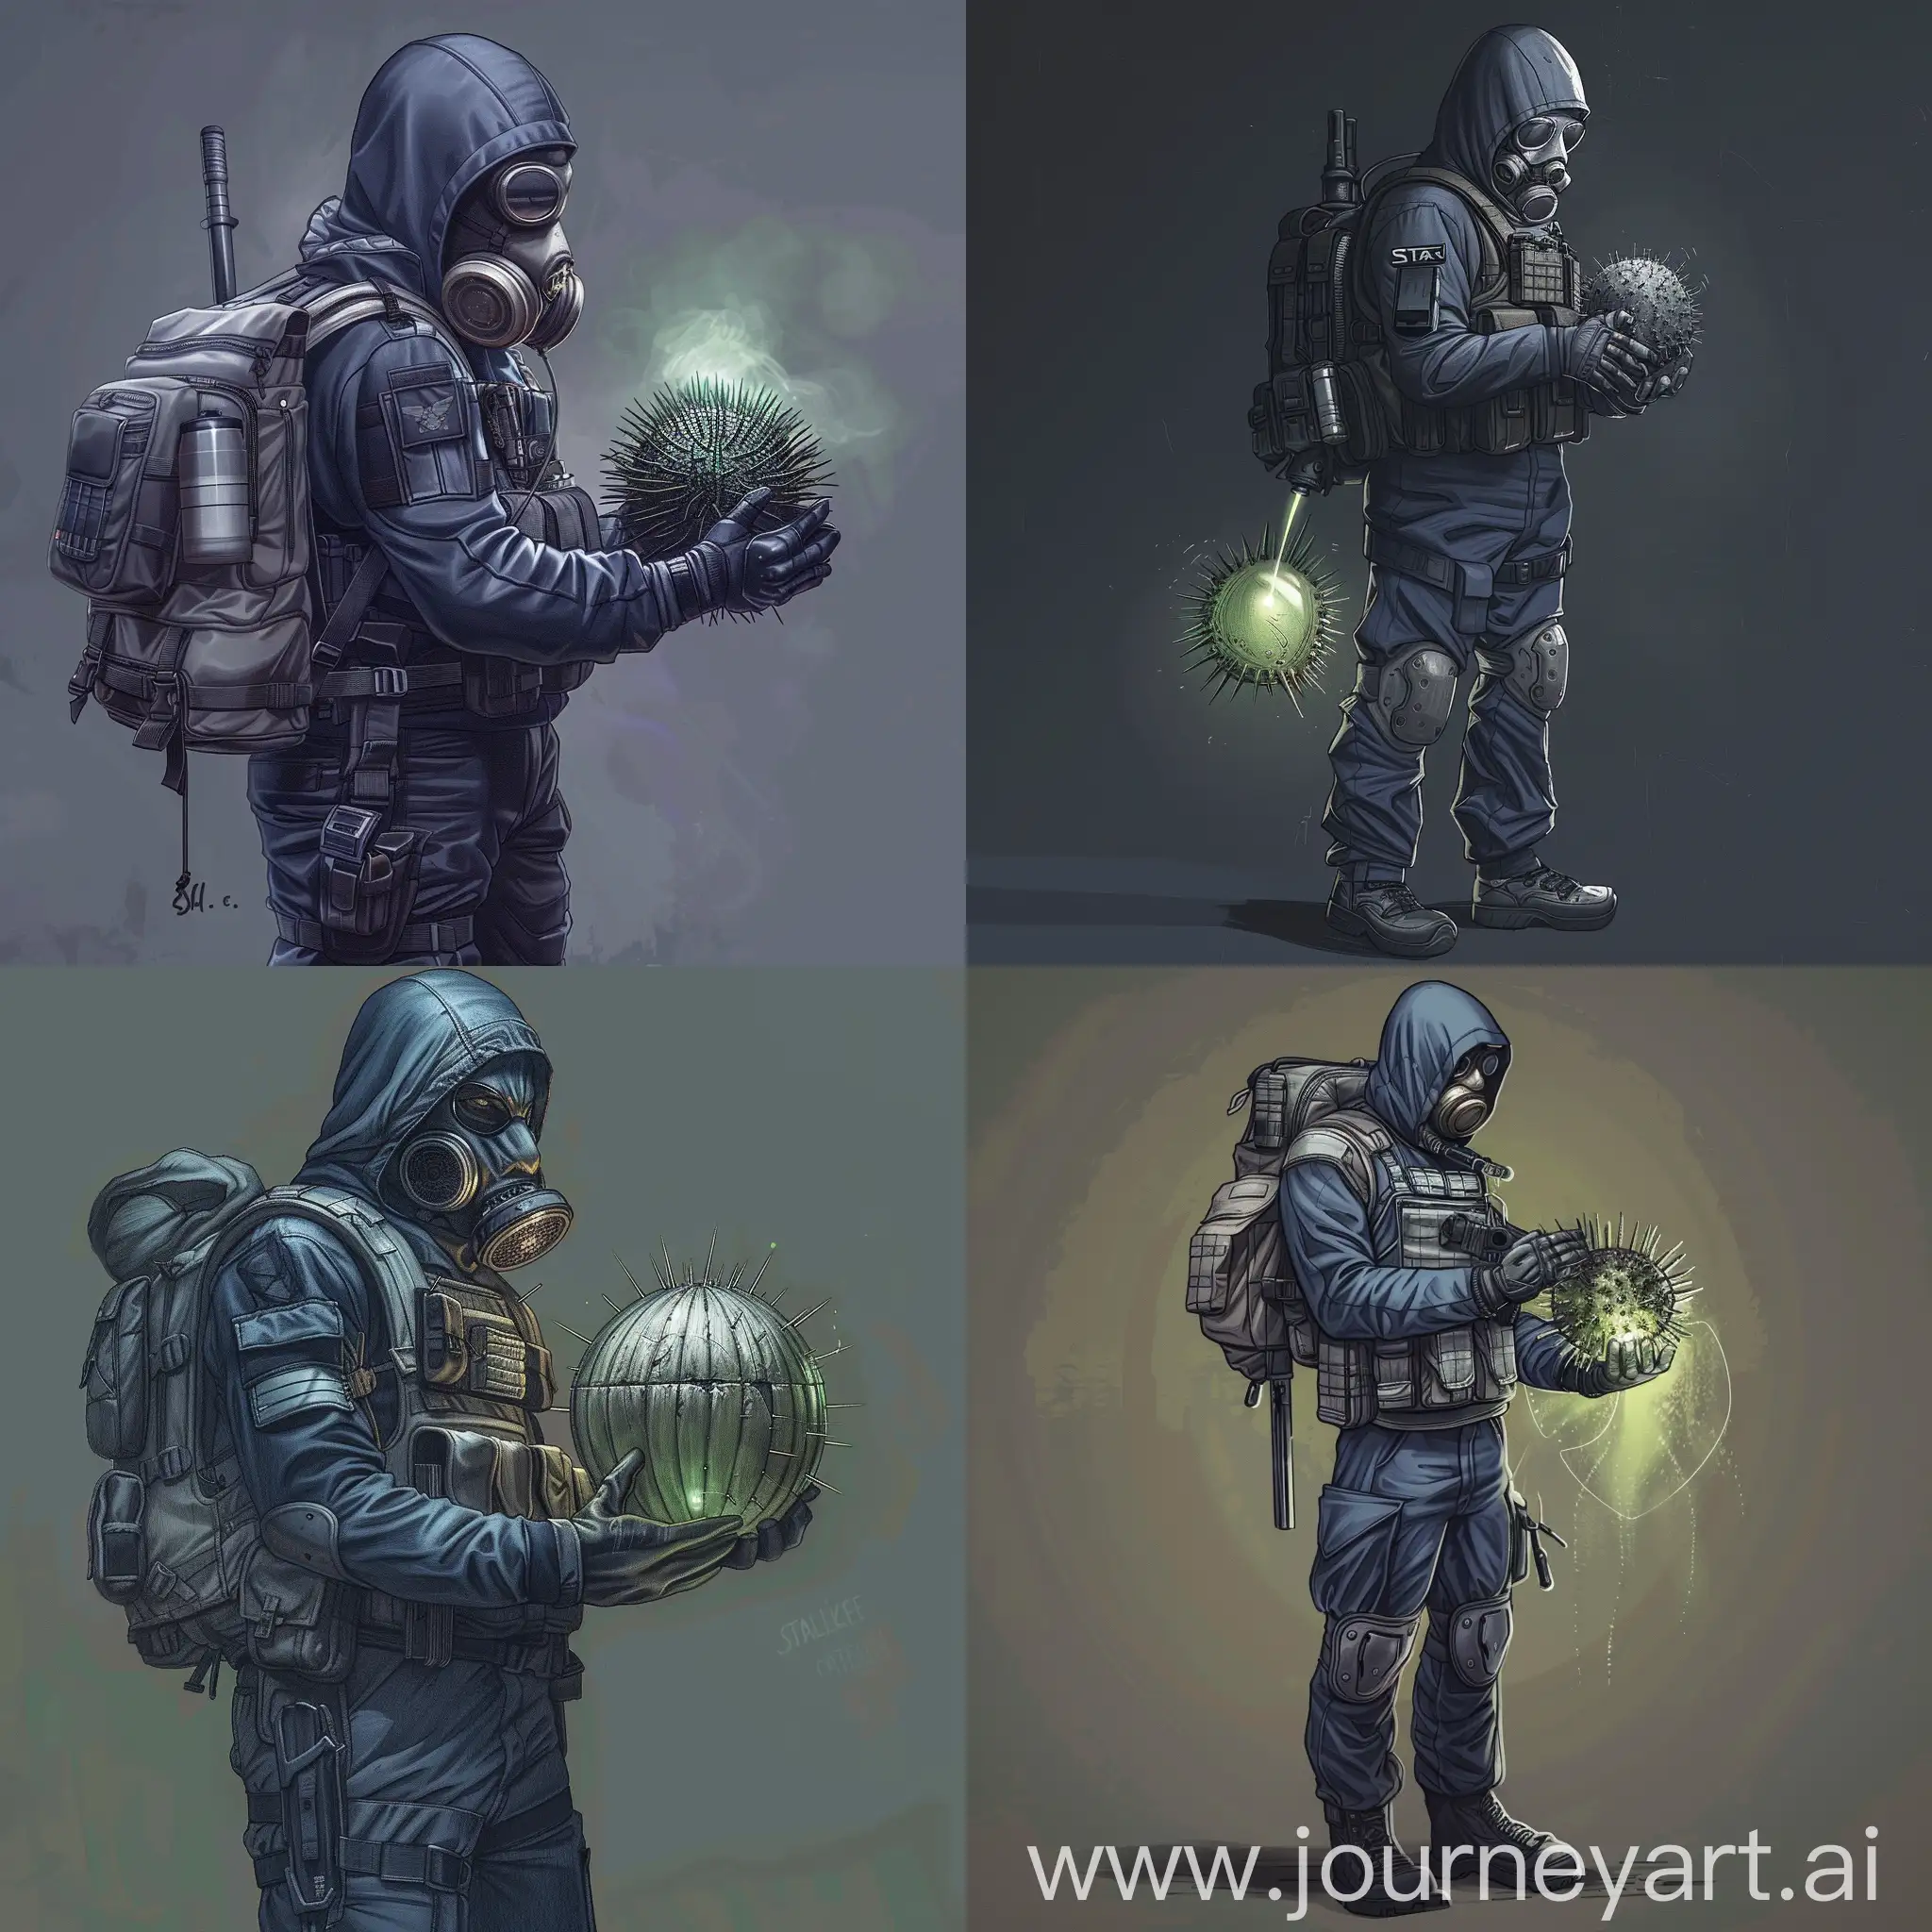 Digital art is a lone mercenary from the universe of S.T.A.L.K.E.R., dressed in a dark blue military jumpsuit, gray military armor on his body, a gasmask on his face, a military backpack on his back, in his hands, he has an artifact that looks like a large prickly ball, it glows bright green, glows at the mercenary.